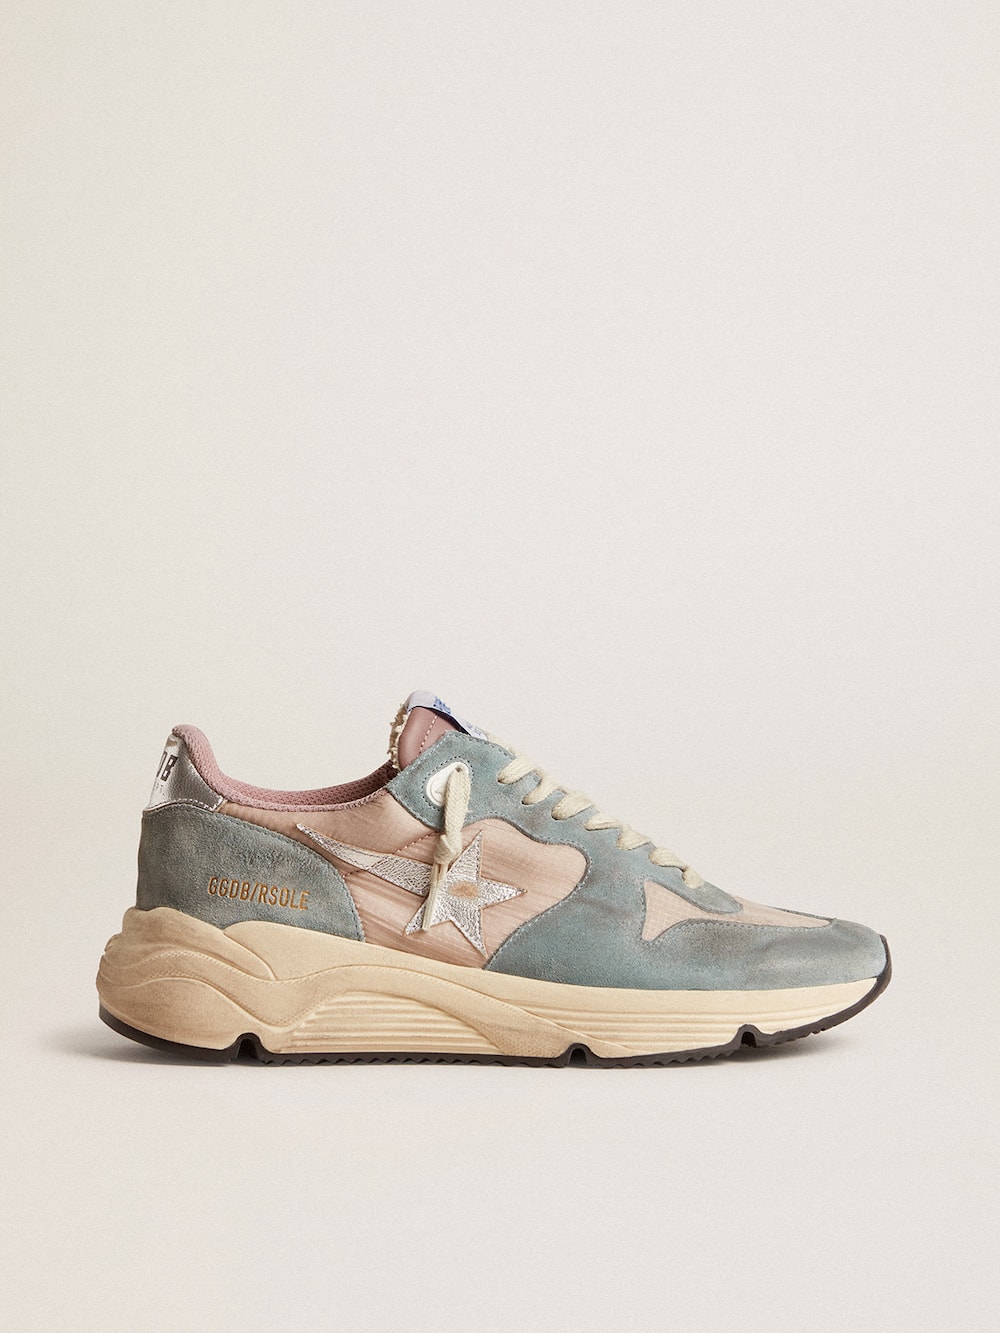 Golden Goose - Women's Running Sole in pink nylon and light-blue suede with silver leather star in 